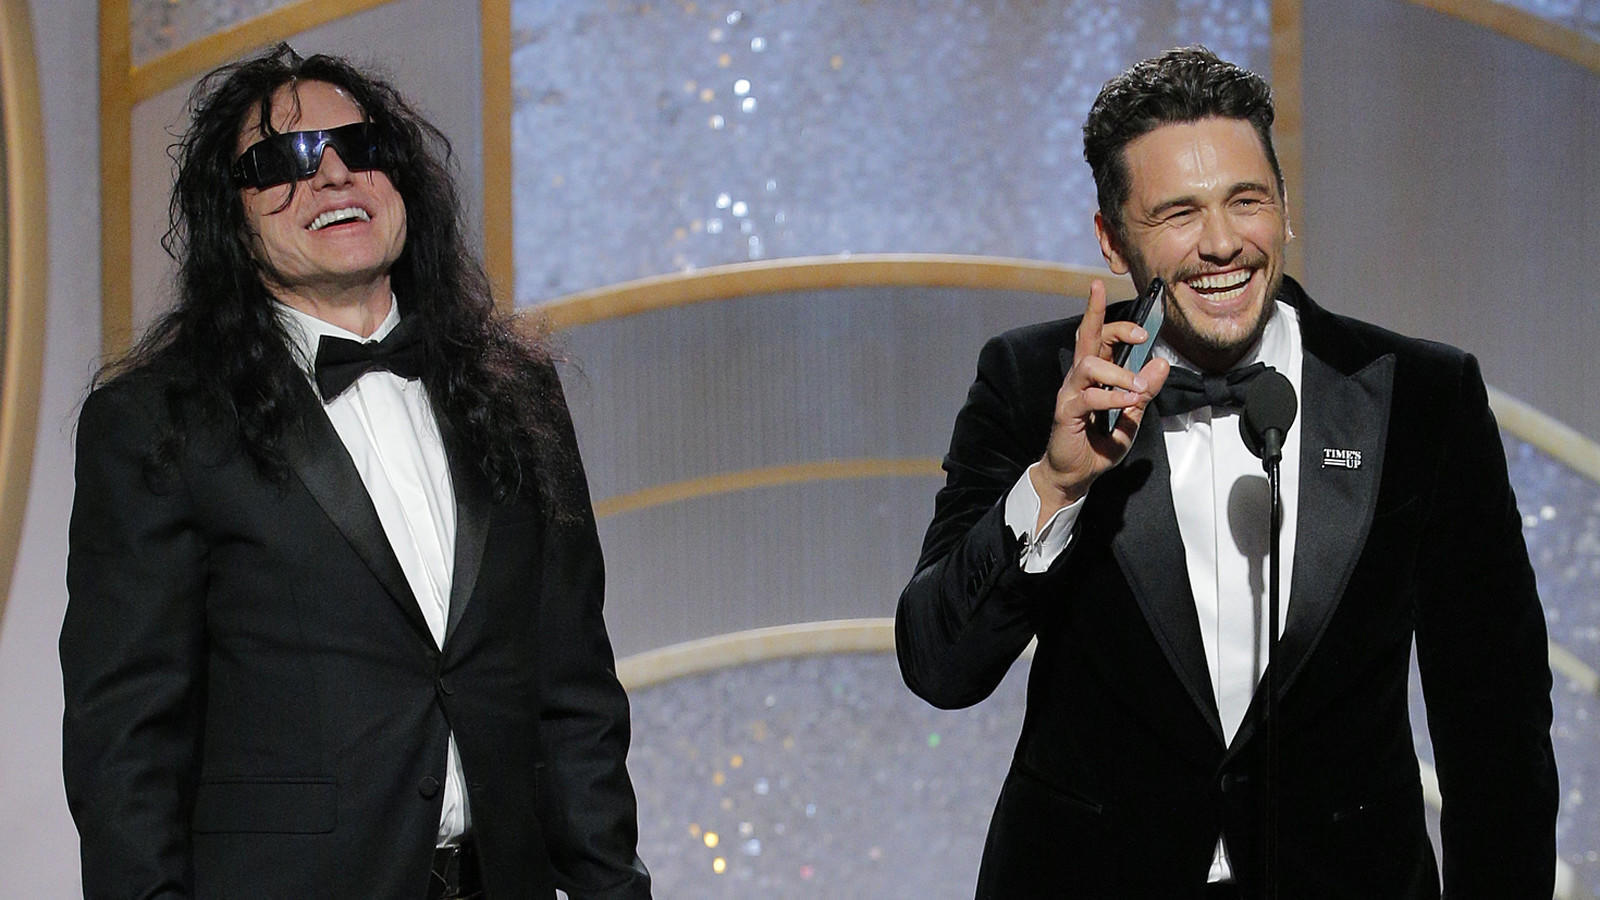 Tommy Wiseau reveals what he would have said on stage at the Golden Globes - LA Times1600 x 900